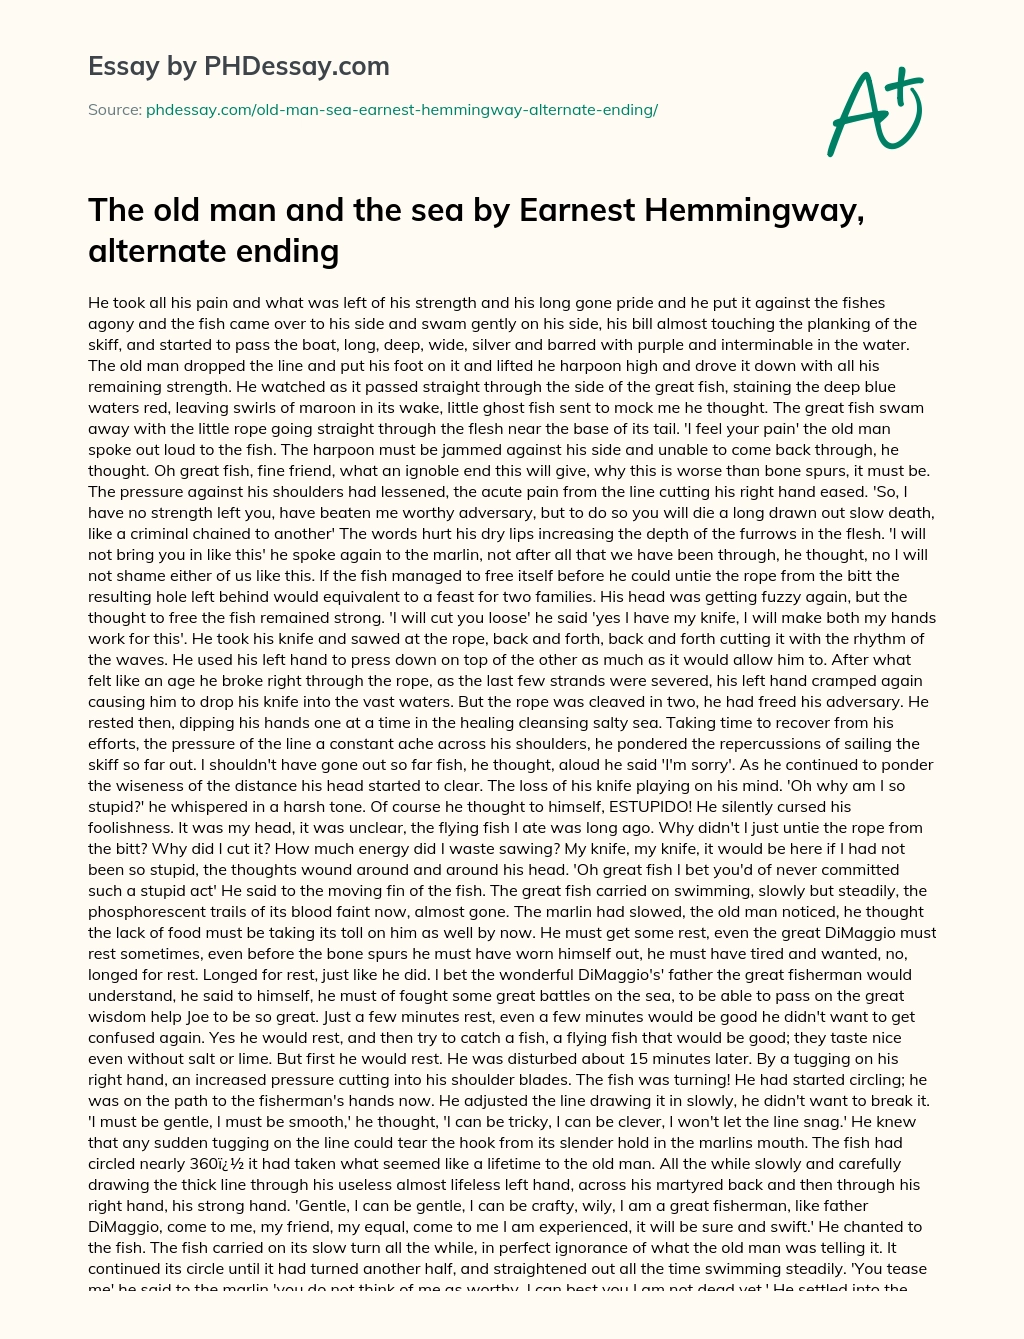 The old man and the sea by Earnest Hemmingway, alternate ending essay